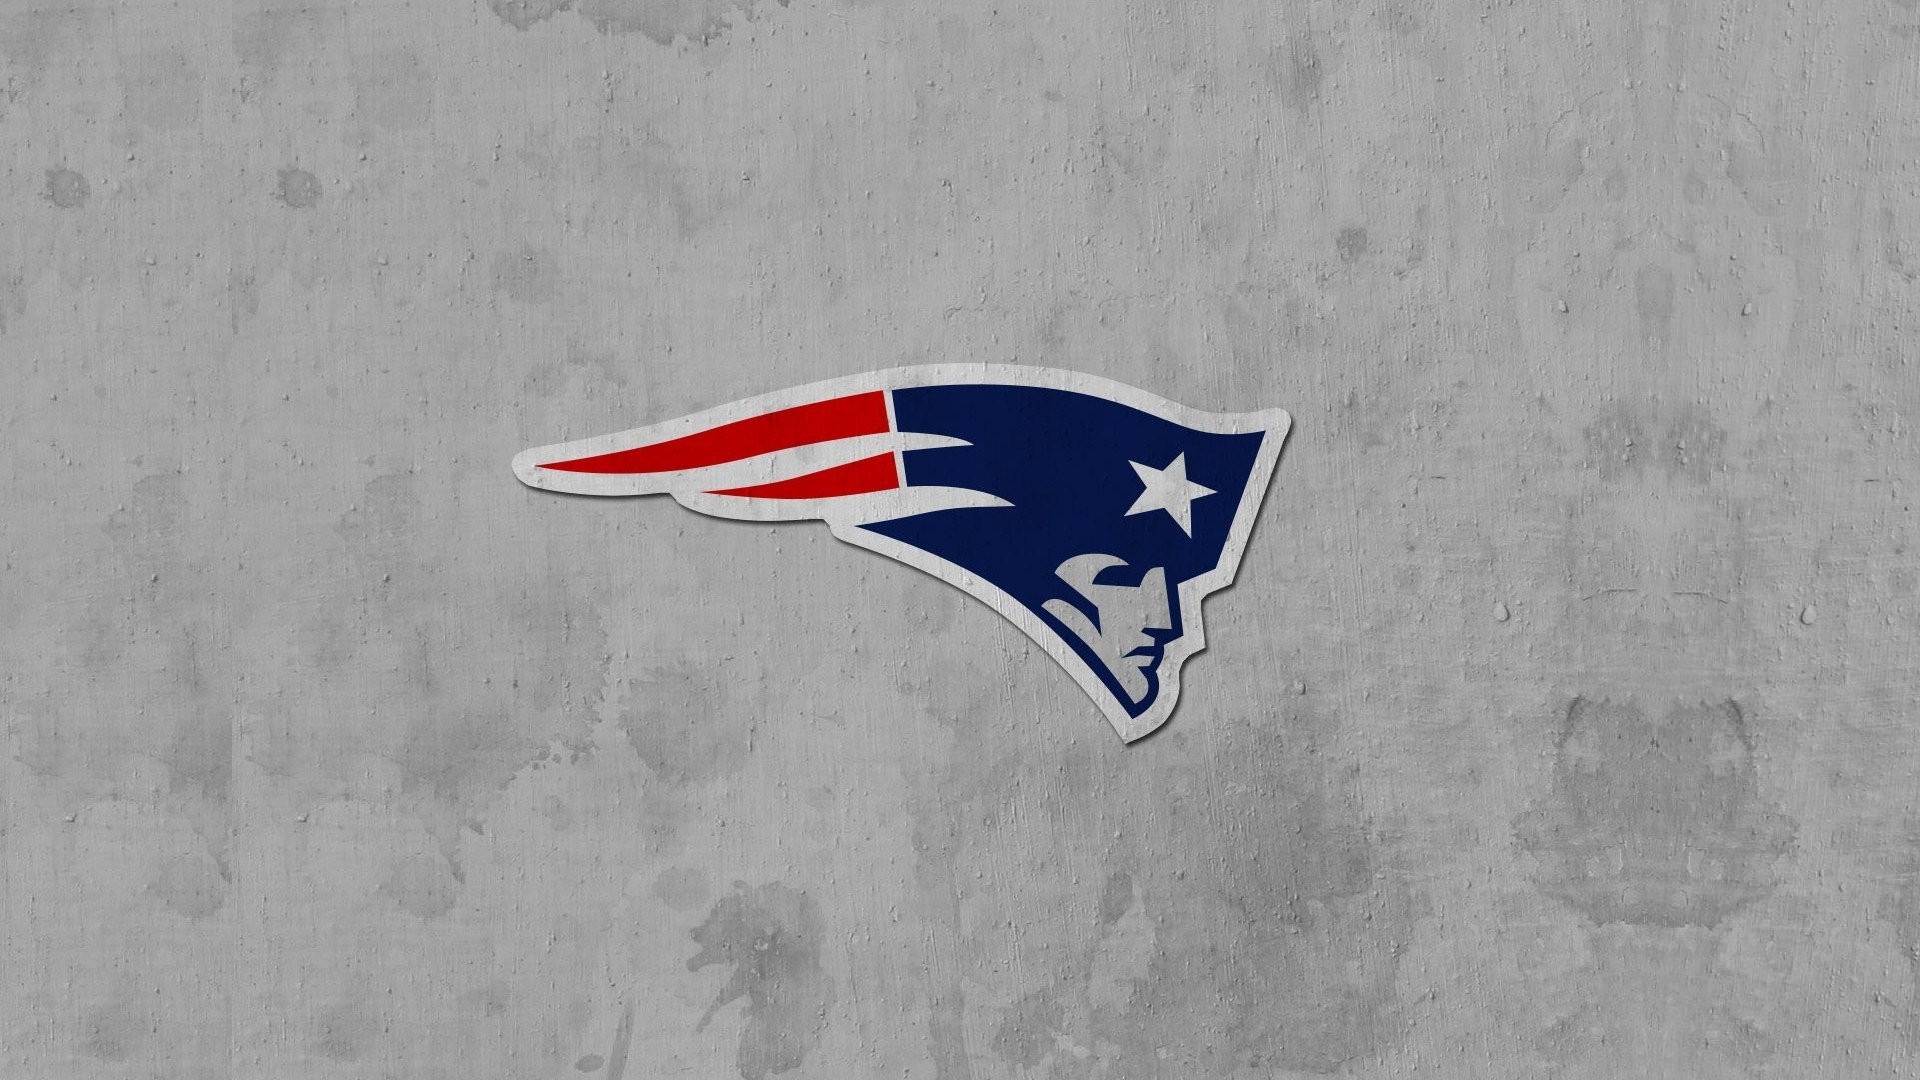 HD Backgrounds NE Patriots with resolution 1920x1080 pixel. You can make this wallpaper for your Mac or Windows Desktop Background, iPhone, Android or Tablet and another Smartphone device